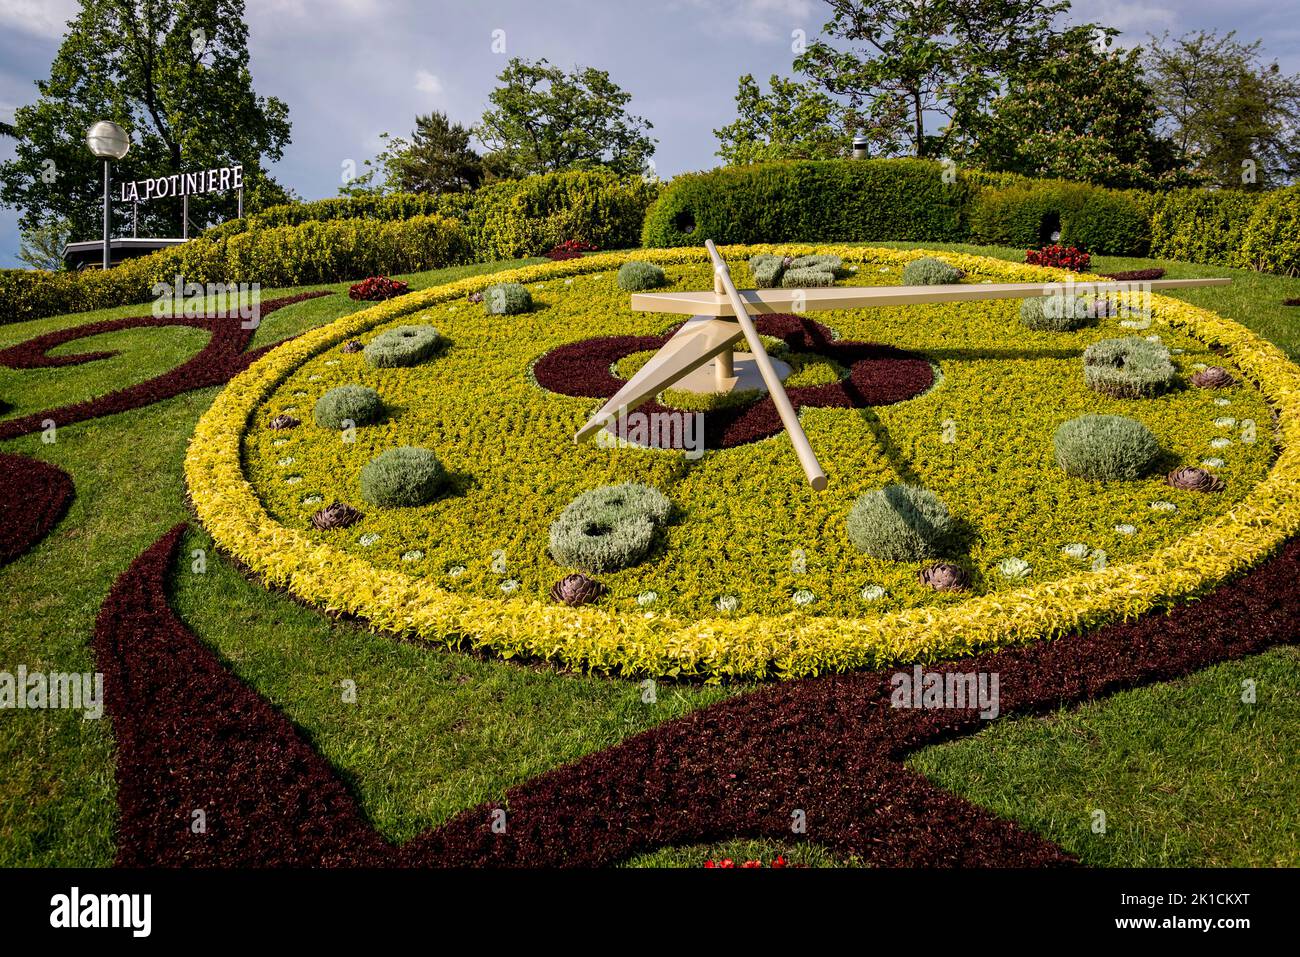 L'horloge fleurie, or the flower clock, is an outdoor flower clock located on the western side of Jardin Anglais park, Geneva, Switzerland Stock Photo